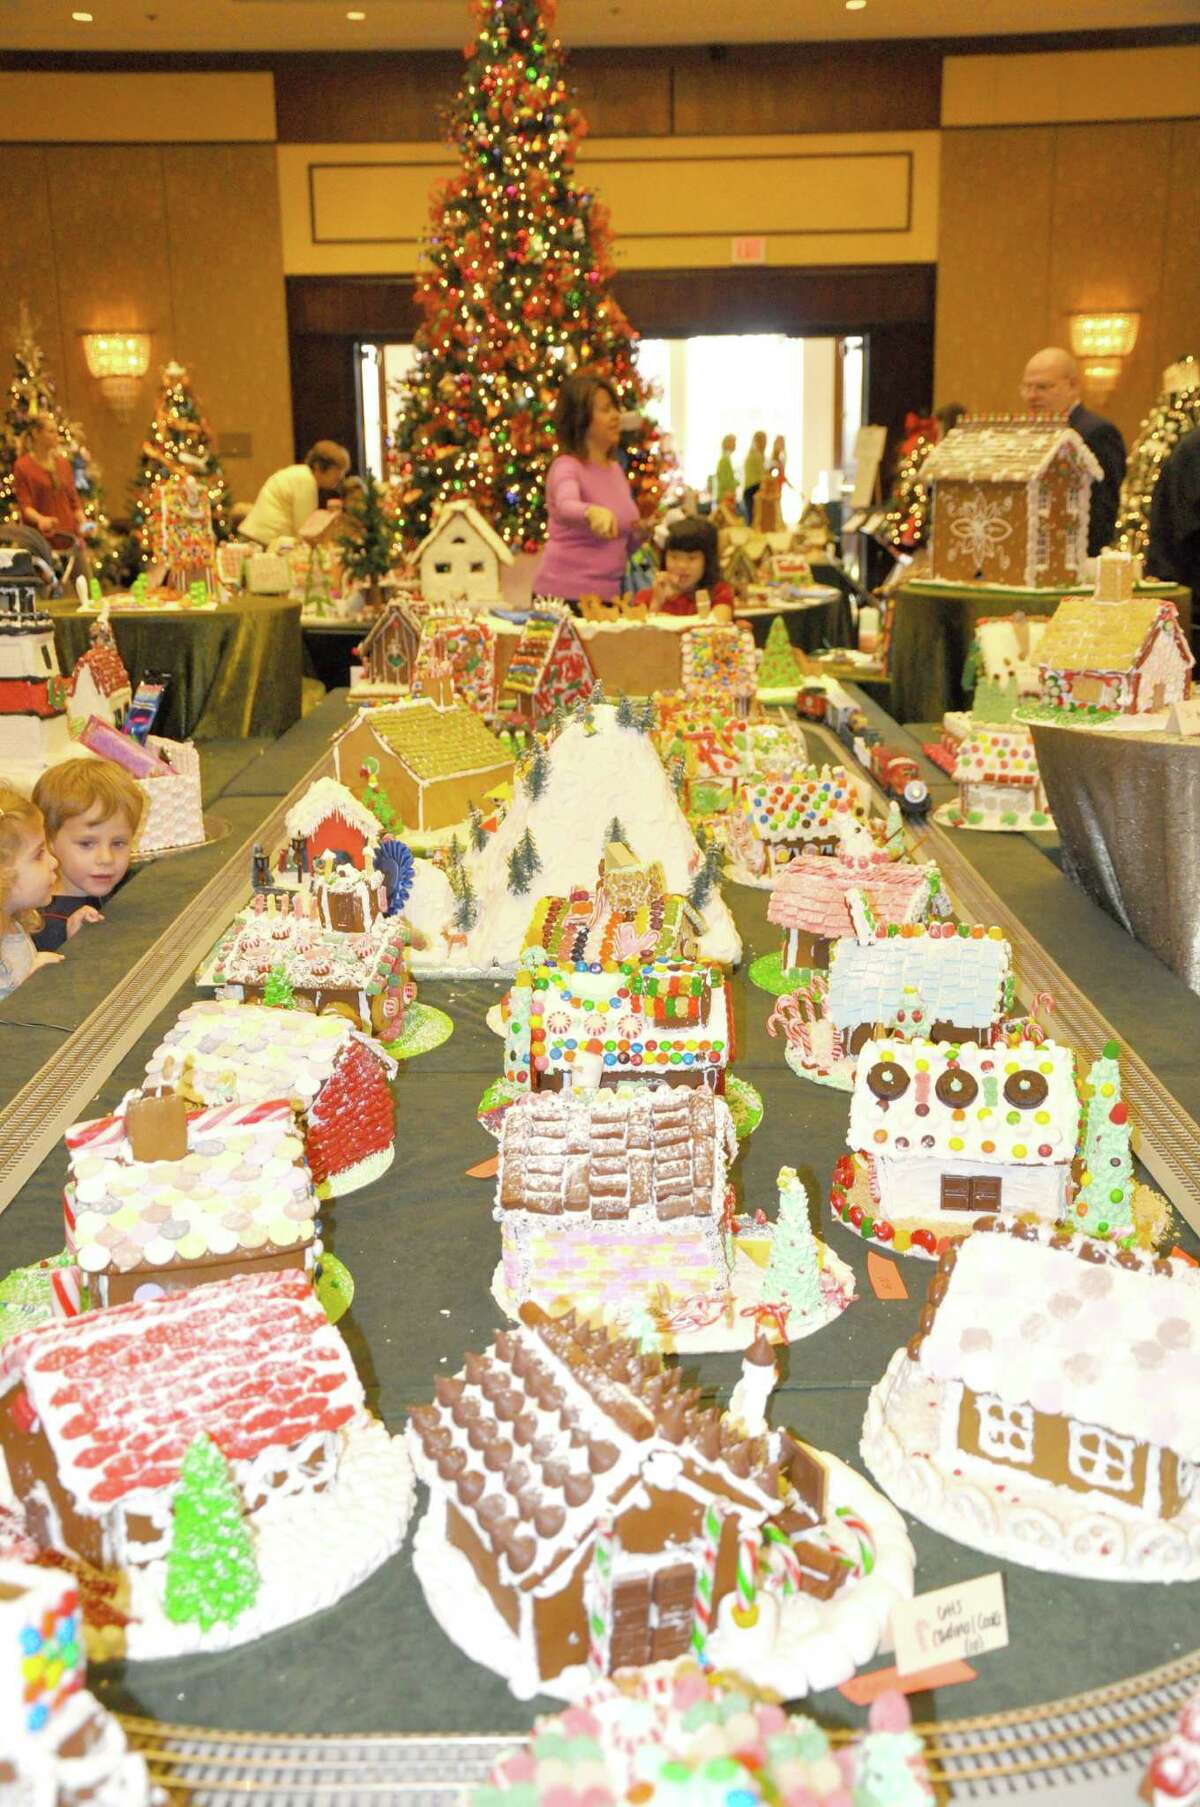 Gingerbread houses have long been a draw for the Junior League of Greenwich's annual Enchanted Forest benefit. The event, and the tasty treats (among other attractions, return Friday, Nov. 21 through Sunday, November 23, 2014, at the Hyatt Regency in Greenwich, Conn.